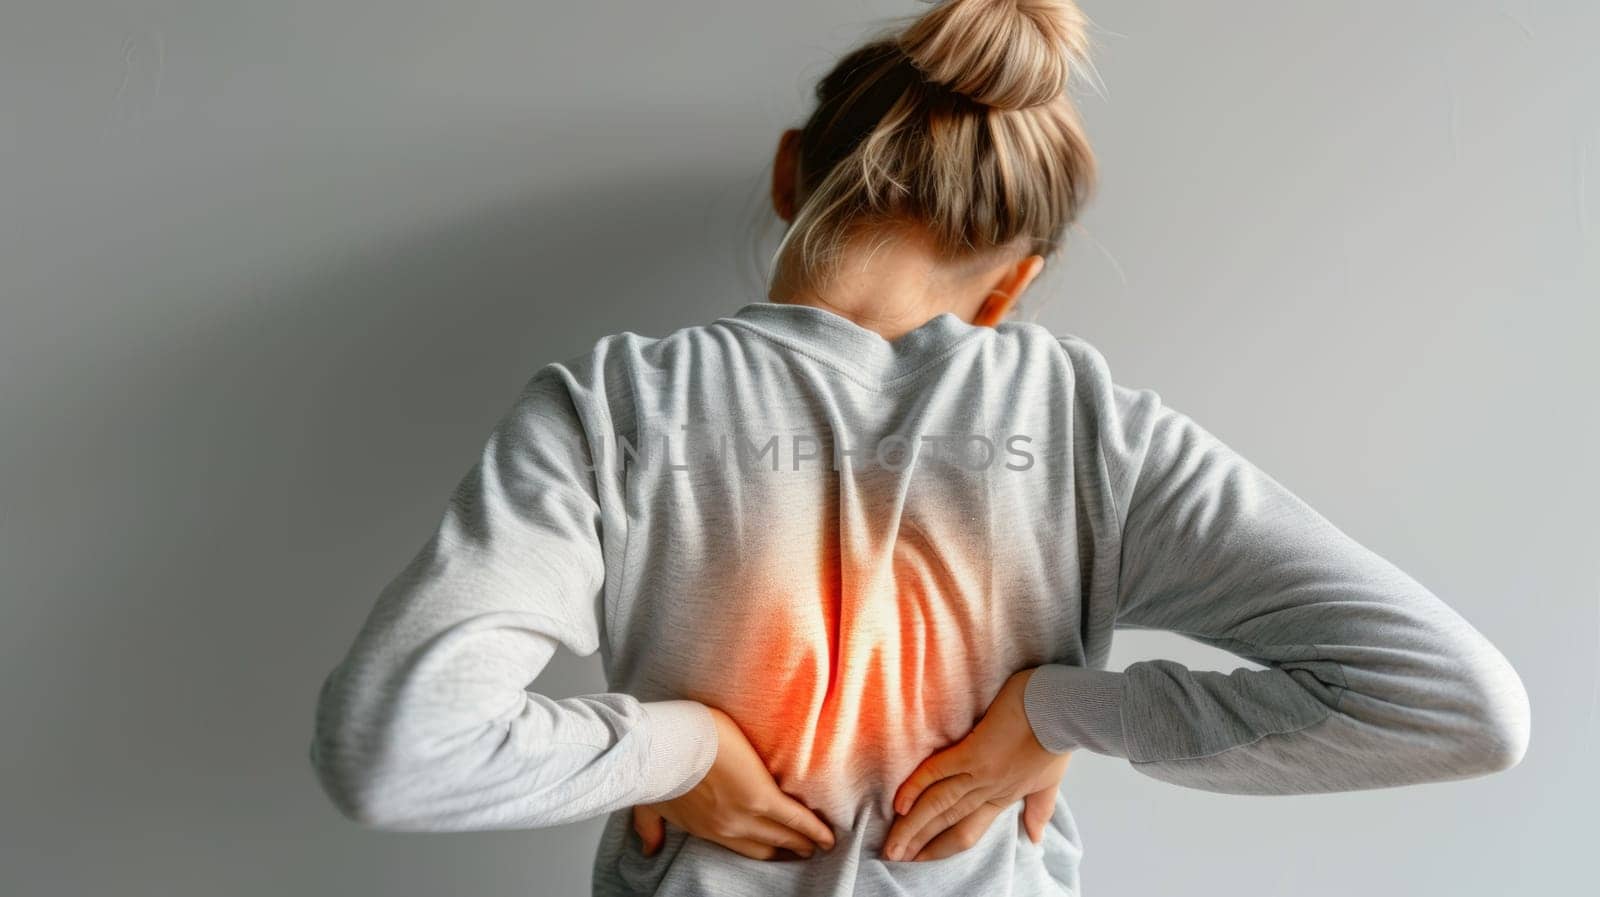 The image shows a woman from behind as she holds her lower back, a visual metaphor for sharp pain. The soft grey tones of her clothing contrast with the vibrant red depicted as pain. by sfinks